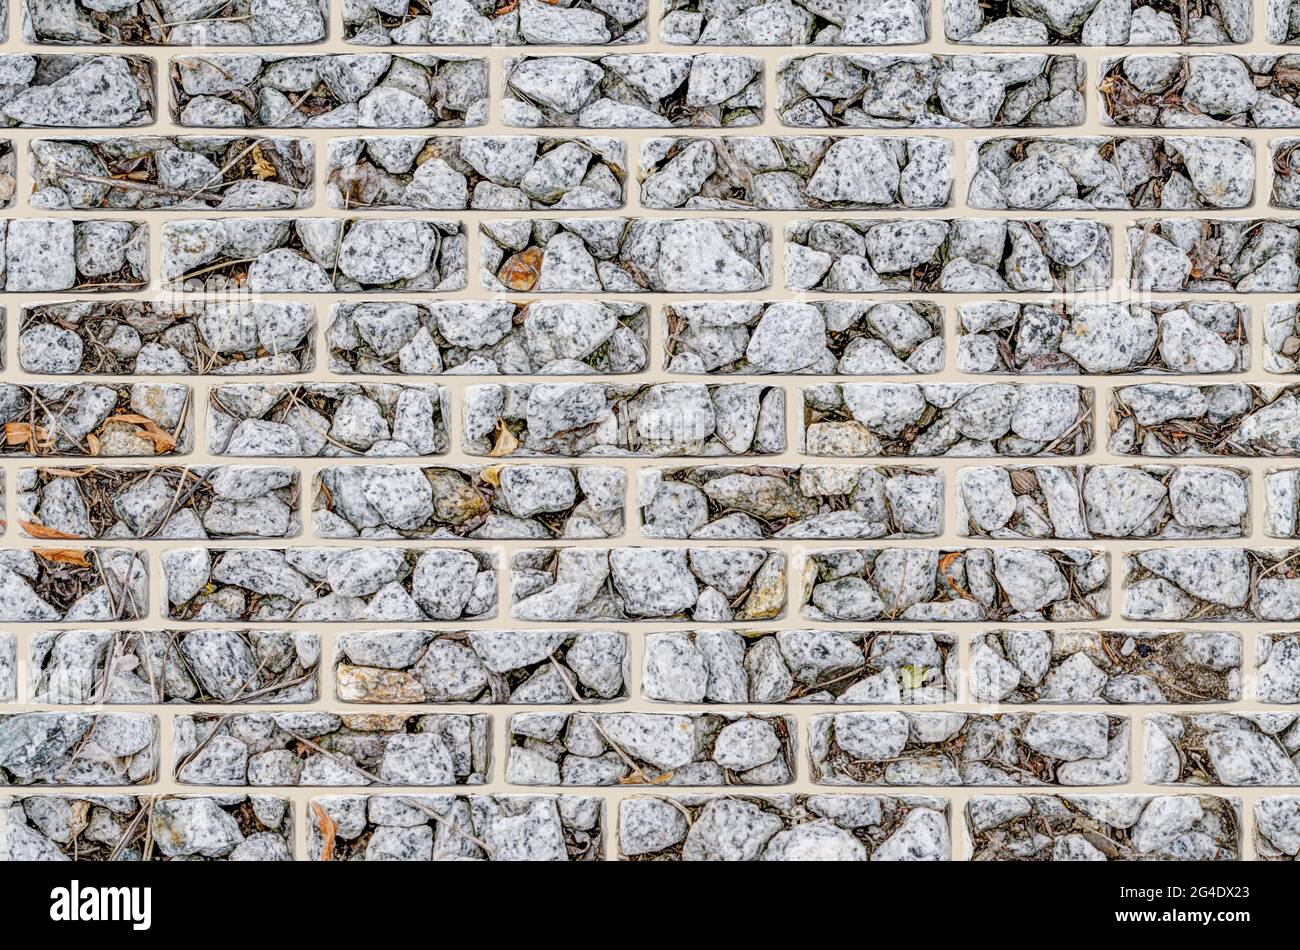 brick walls,brick texture with grey and white stones,background wallpaper for different designs Stock Photo